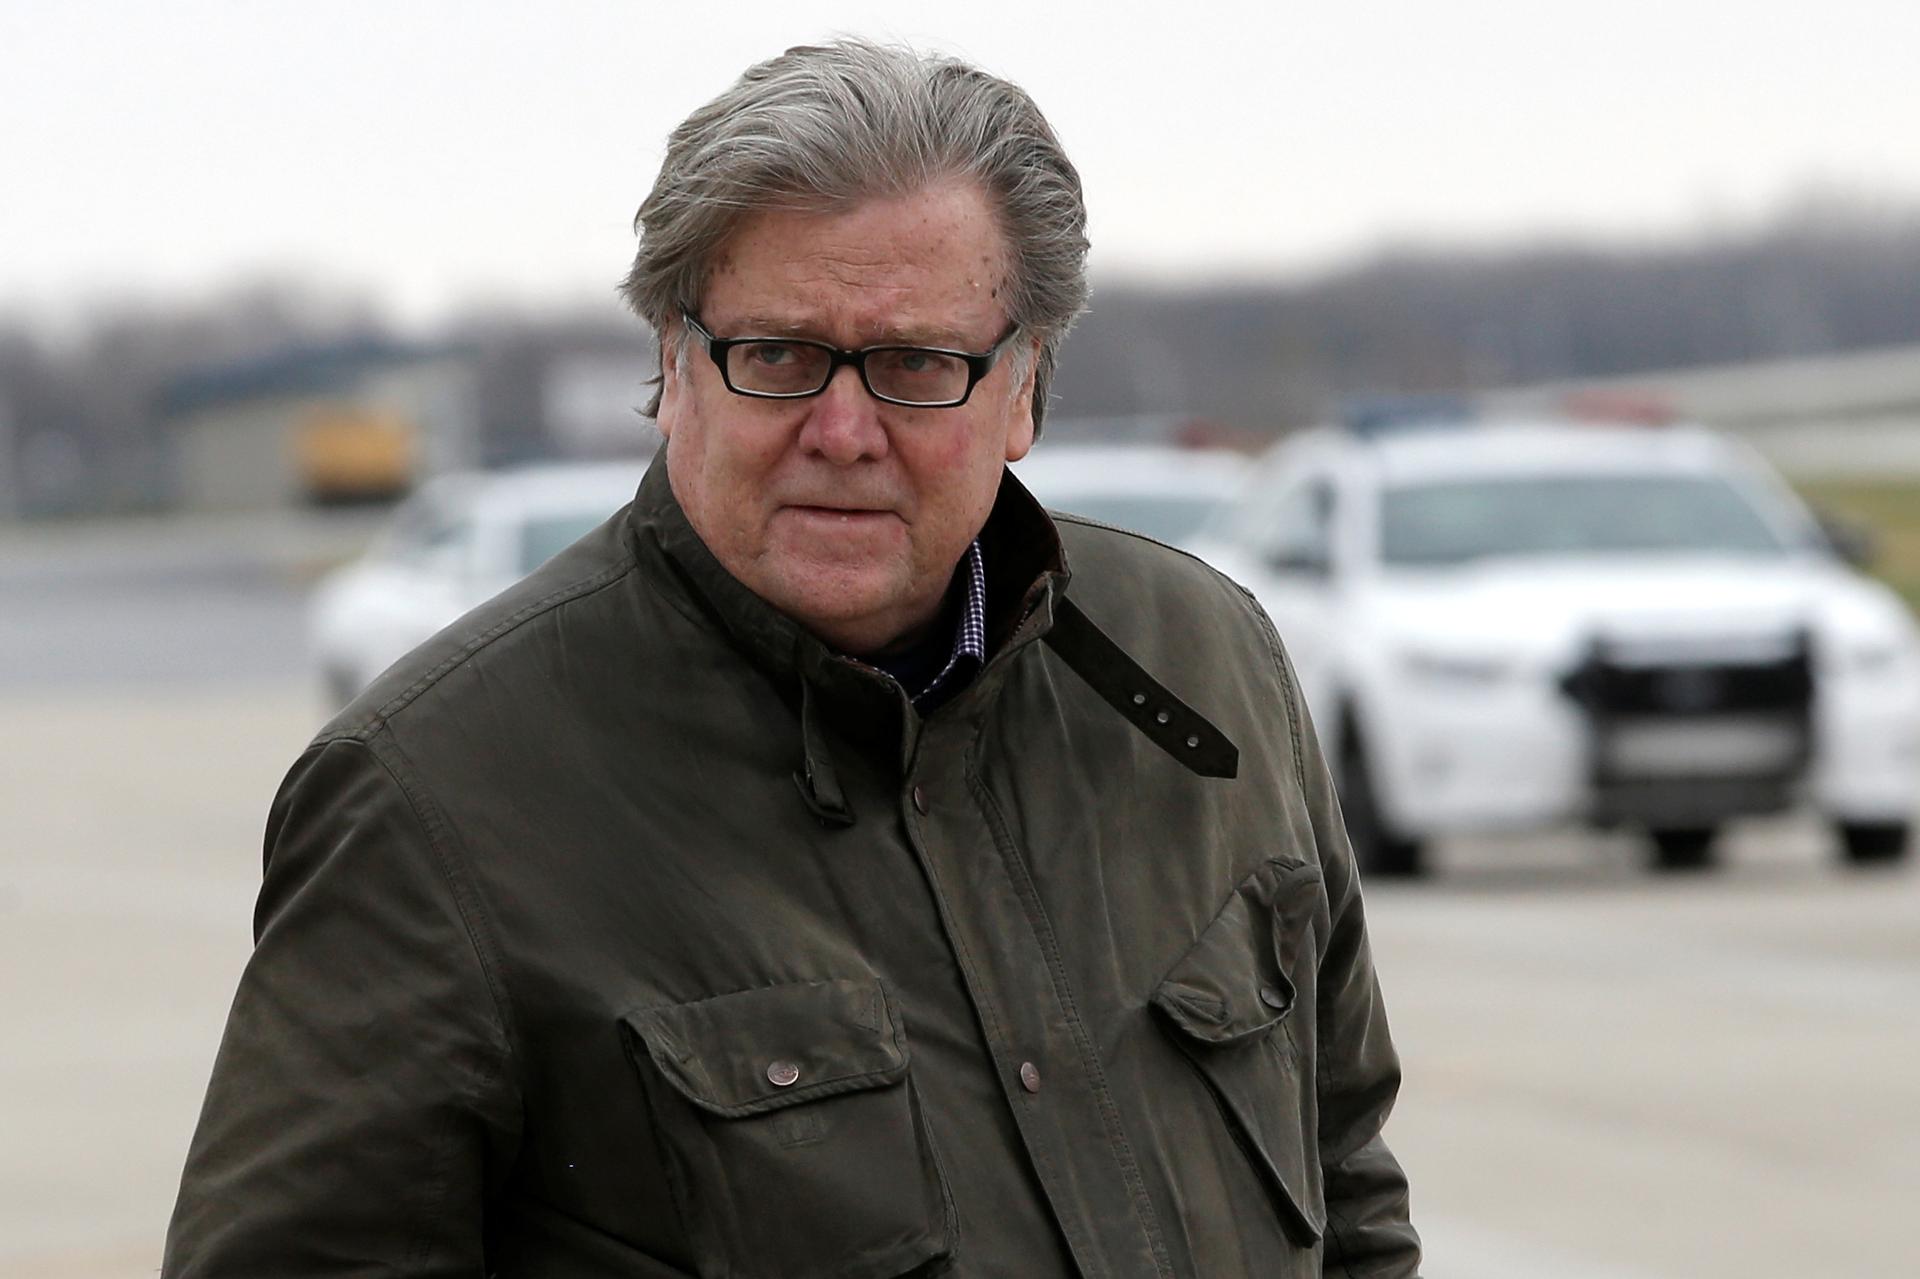 Stephen Bannon, chief strategist to President Donald Trump, was a founding member and executive chairman of Breitbart News, which Bannon called a "platform for the alt-right." He's shown here walking from Trump's plane.